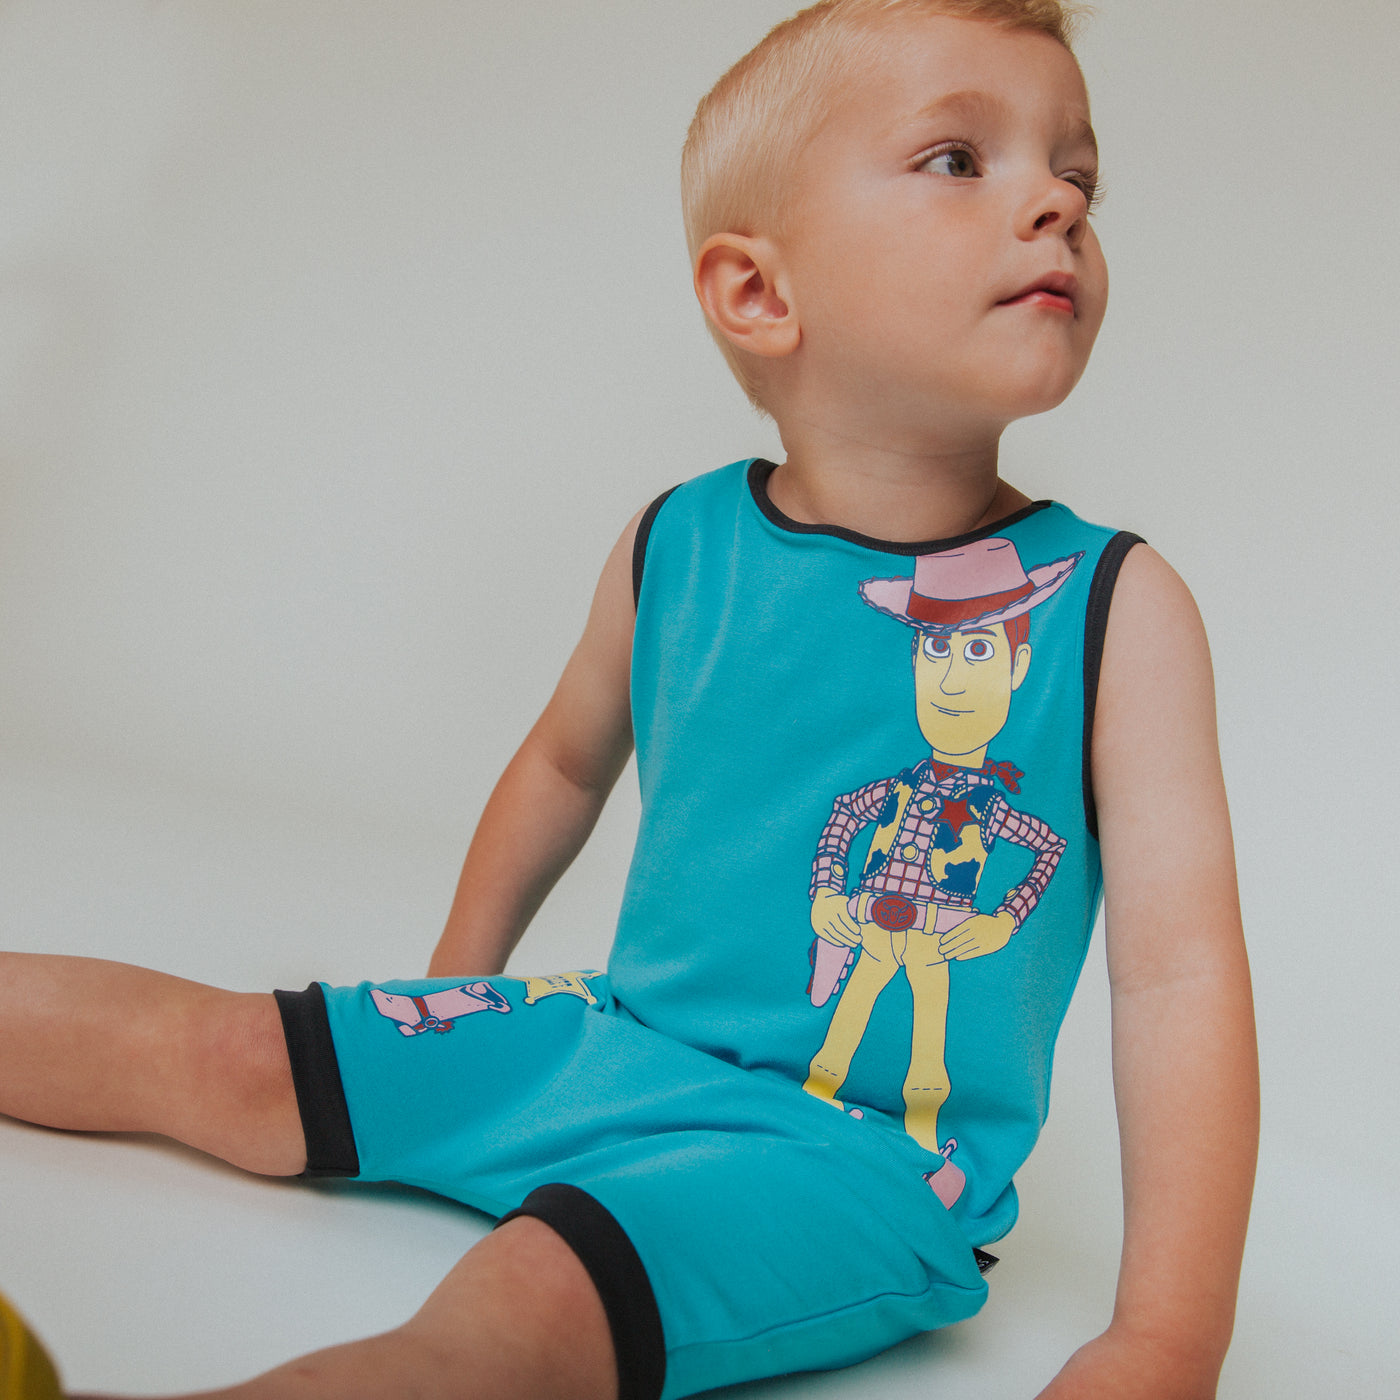 Tank Short Rag Romper - 'Toy Story Woody' - Disney Pixar Collection from RAGS